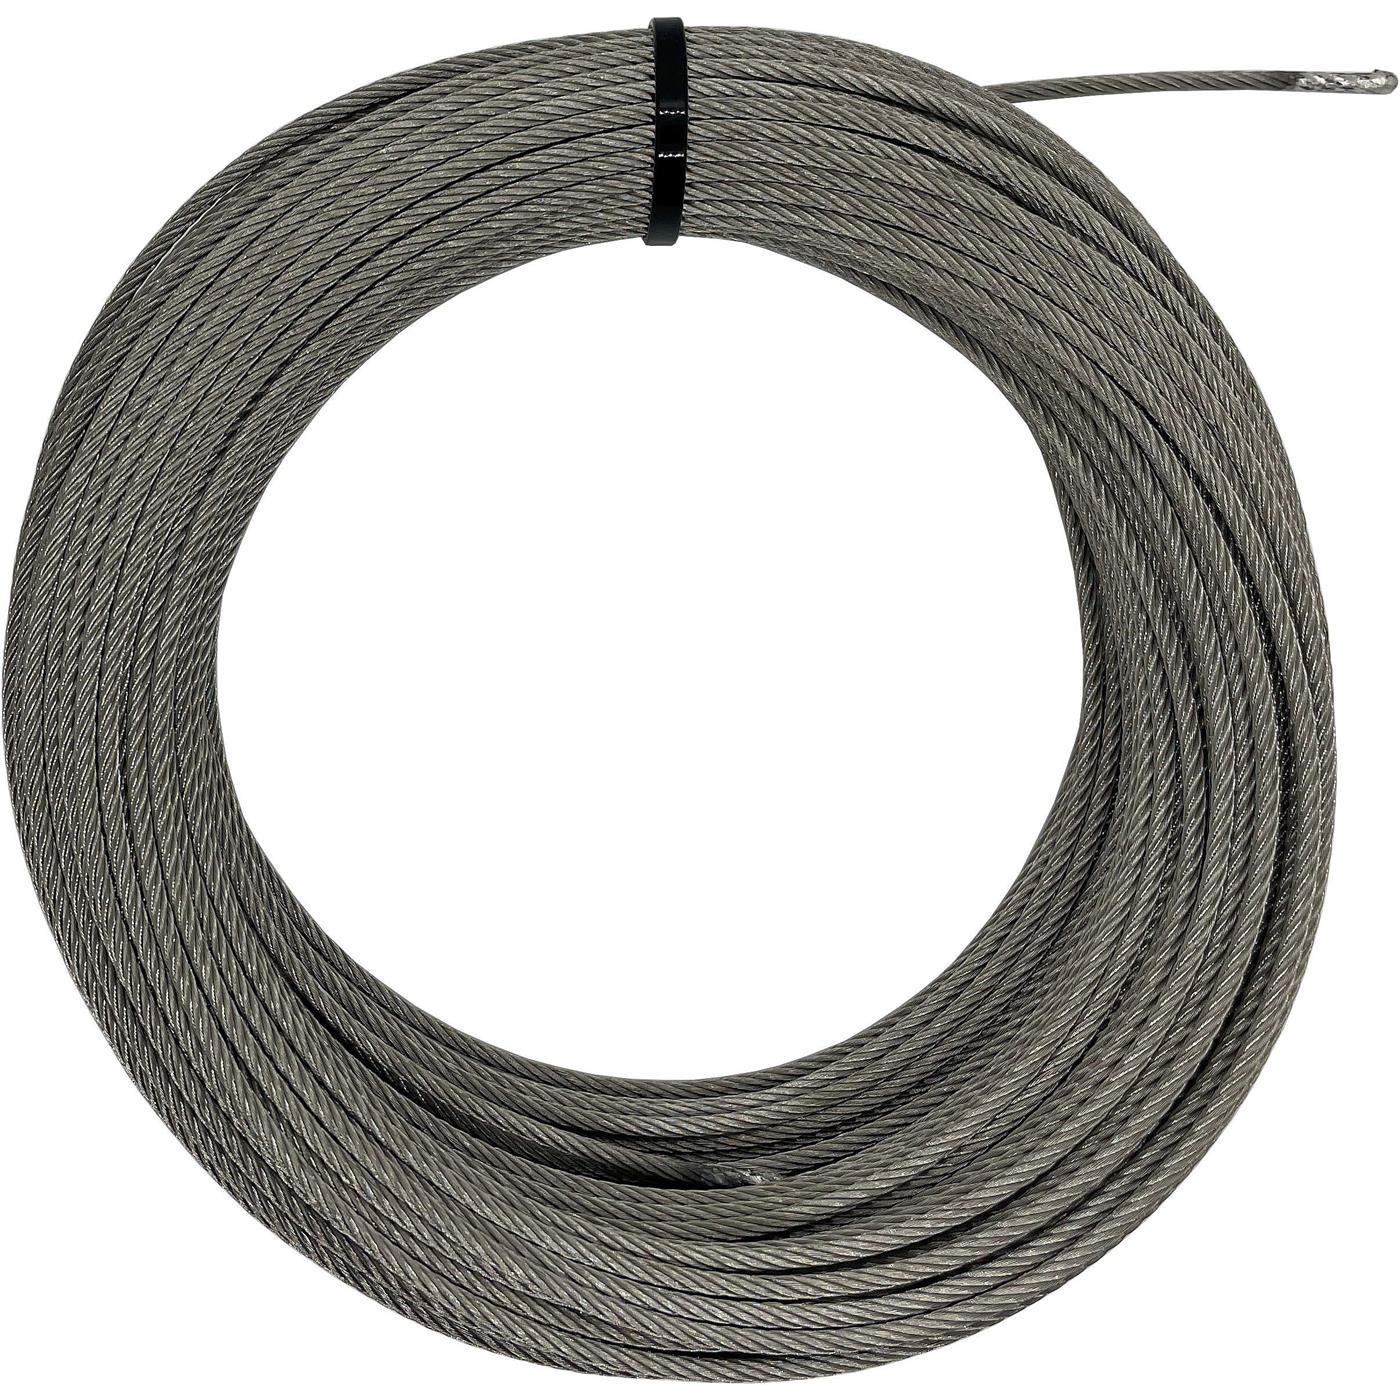 Wire rope 50m Stainless steel V4A 316 4mm 7x19 Ropes stainless for trellis systems